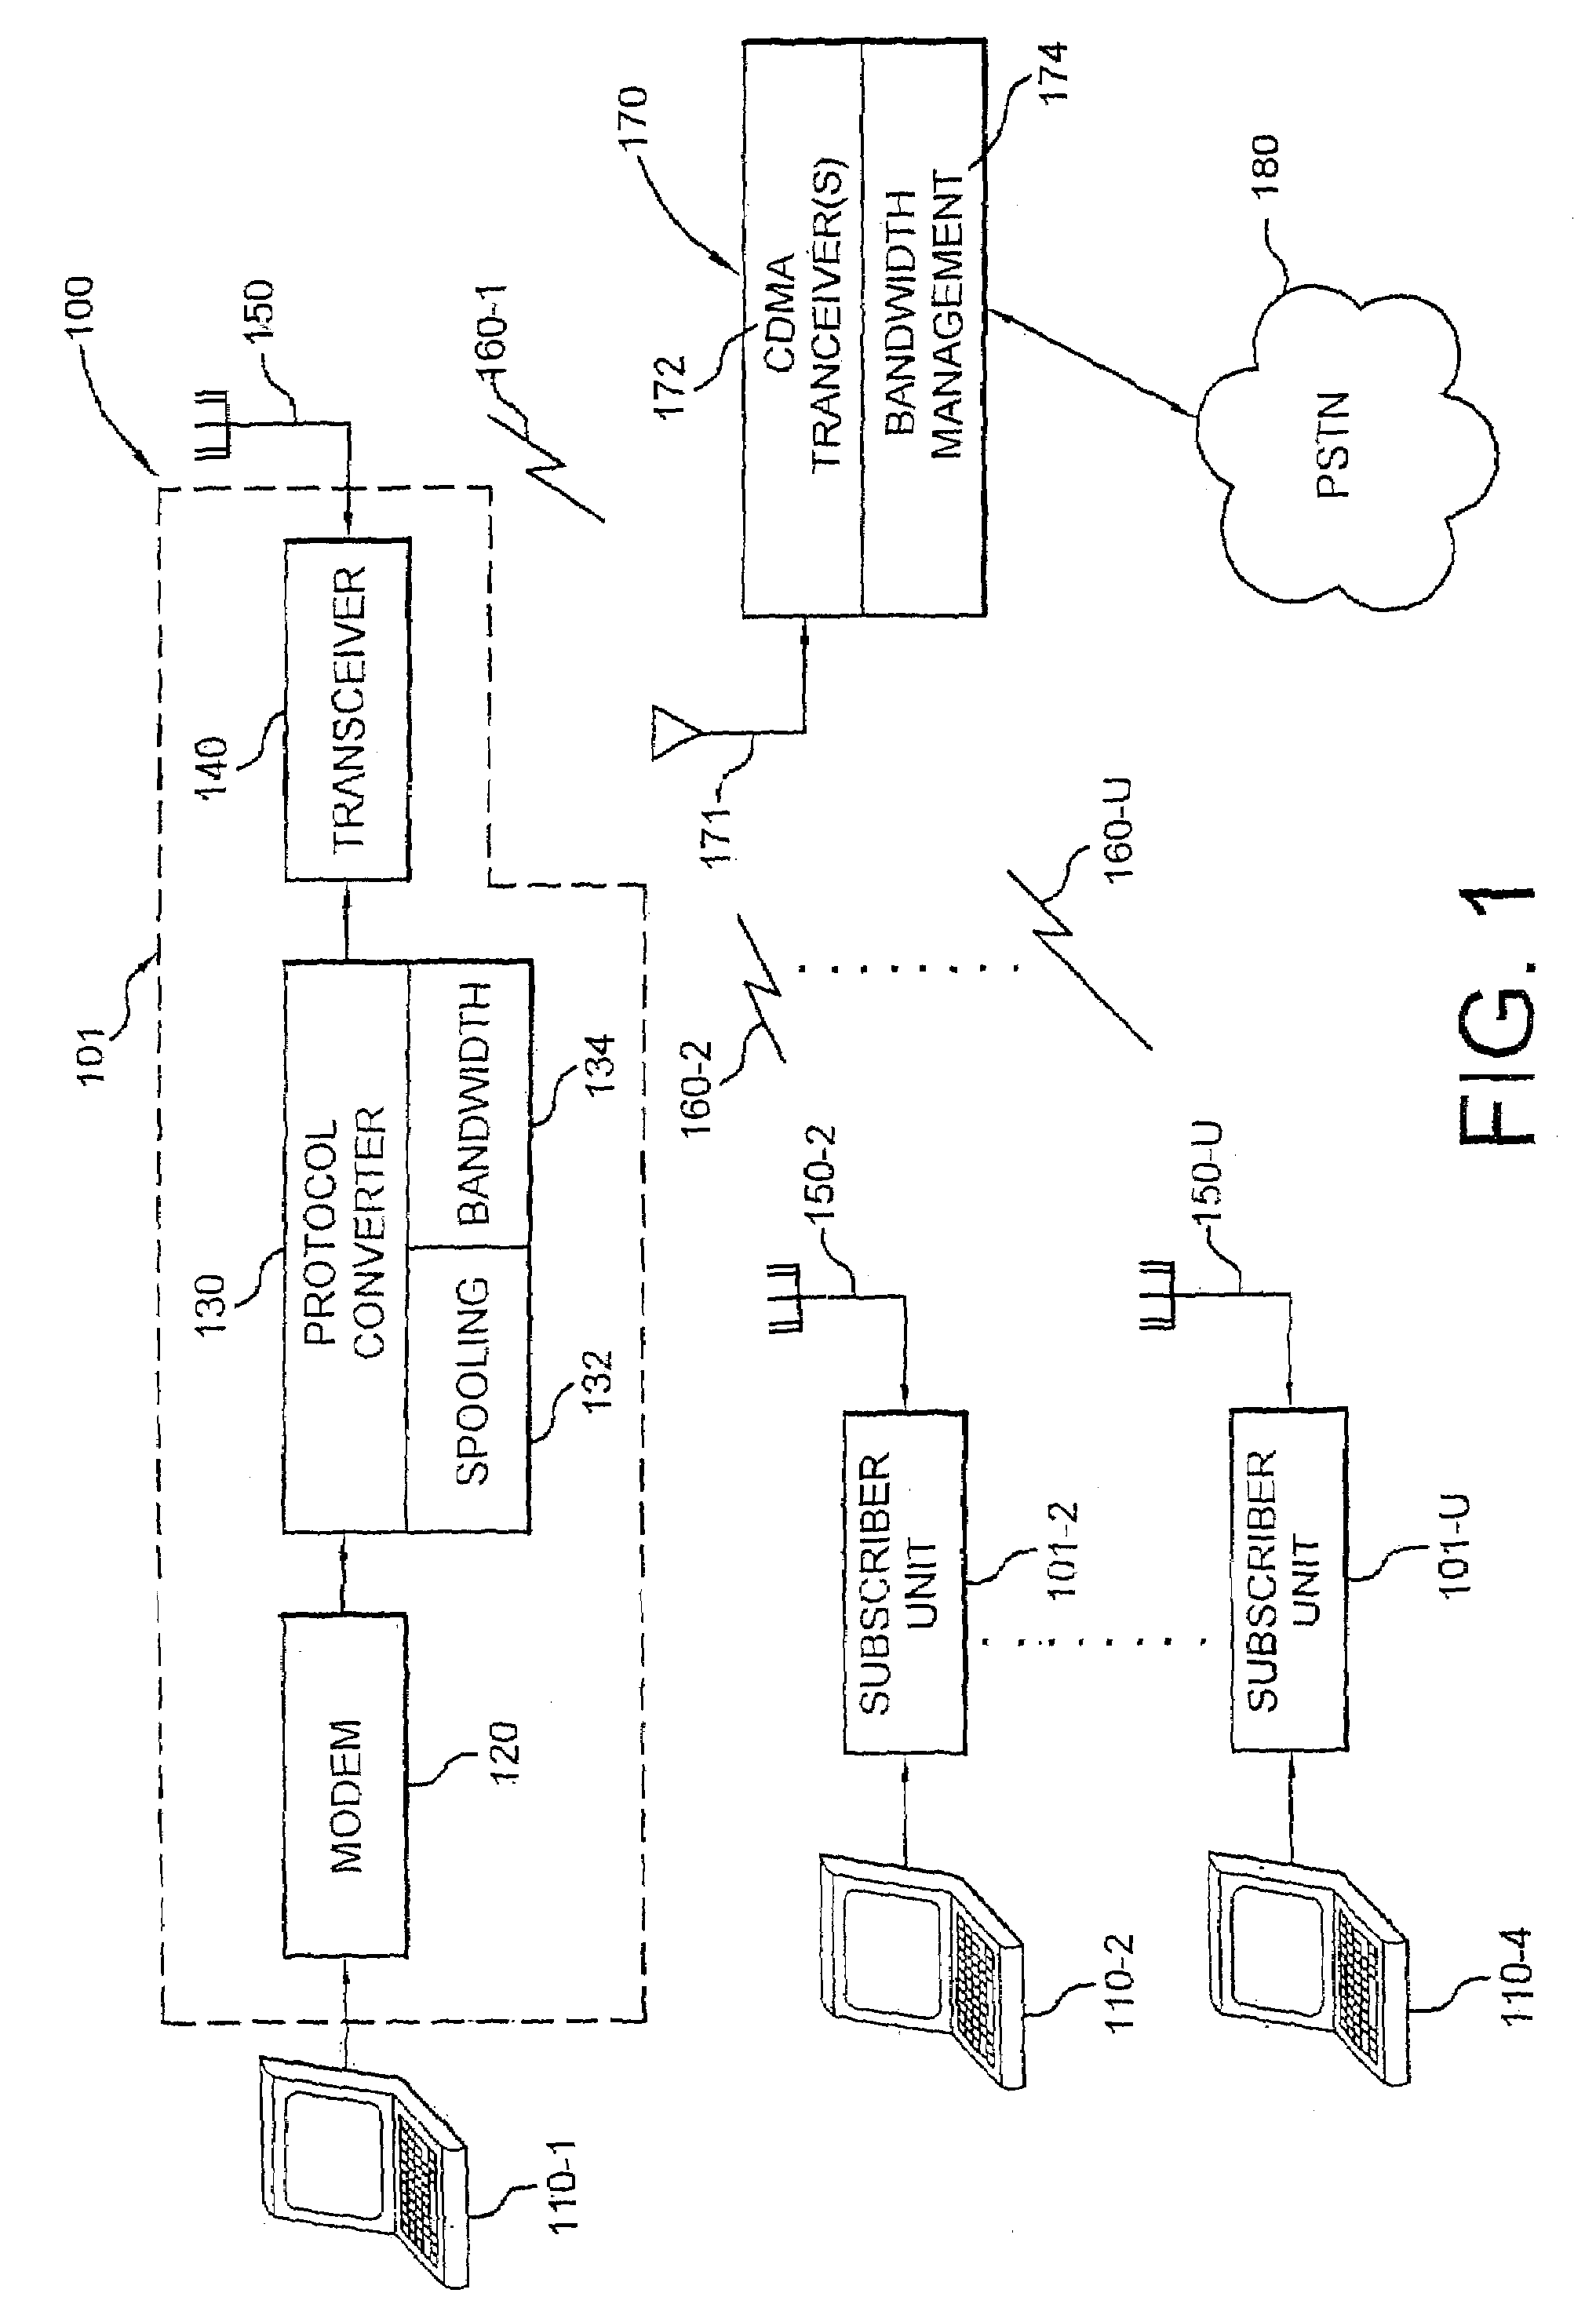 Method for searching pilot signals to synchronize a CDMA receiver with an associated transmitter